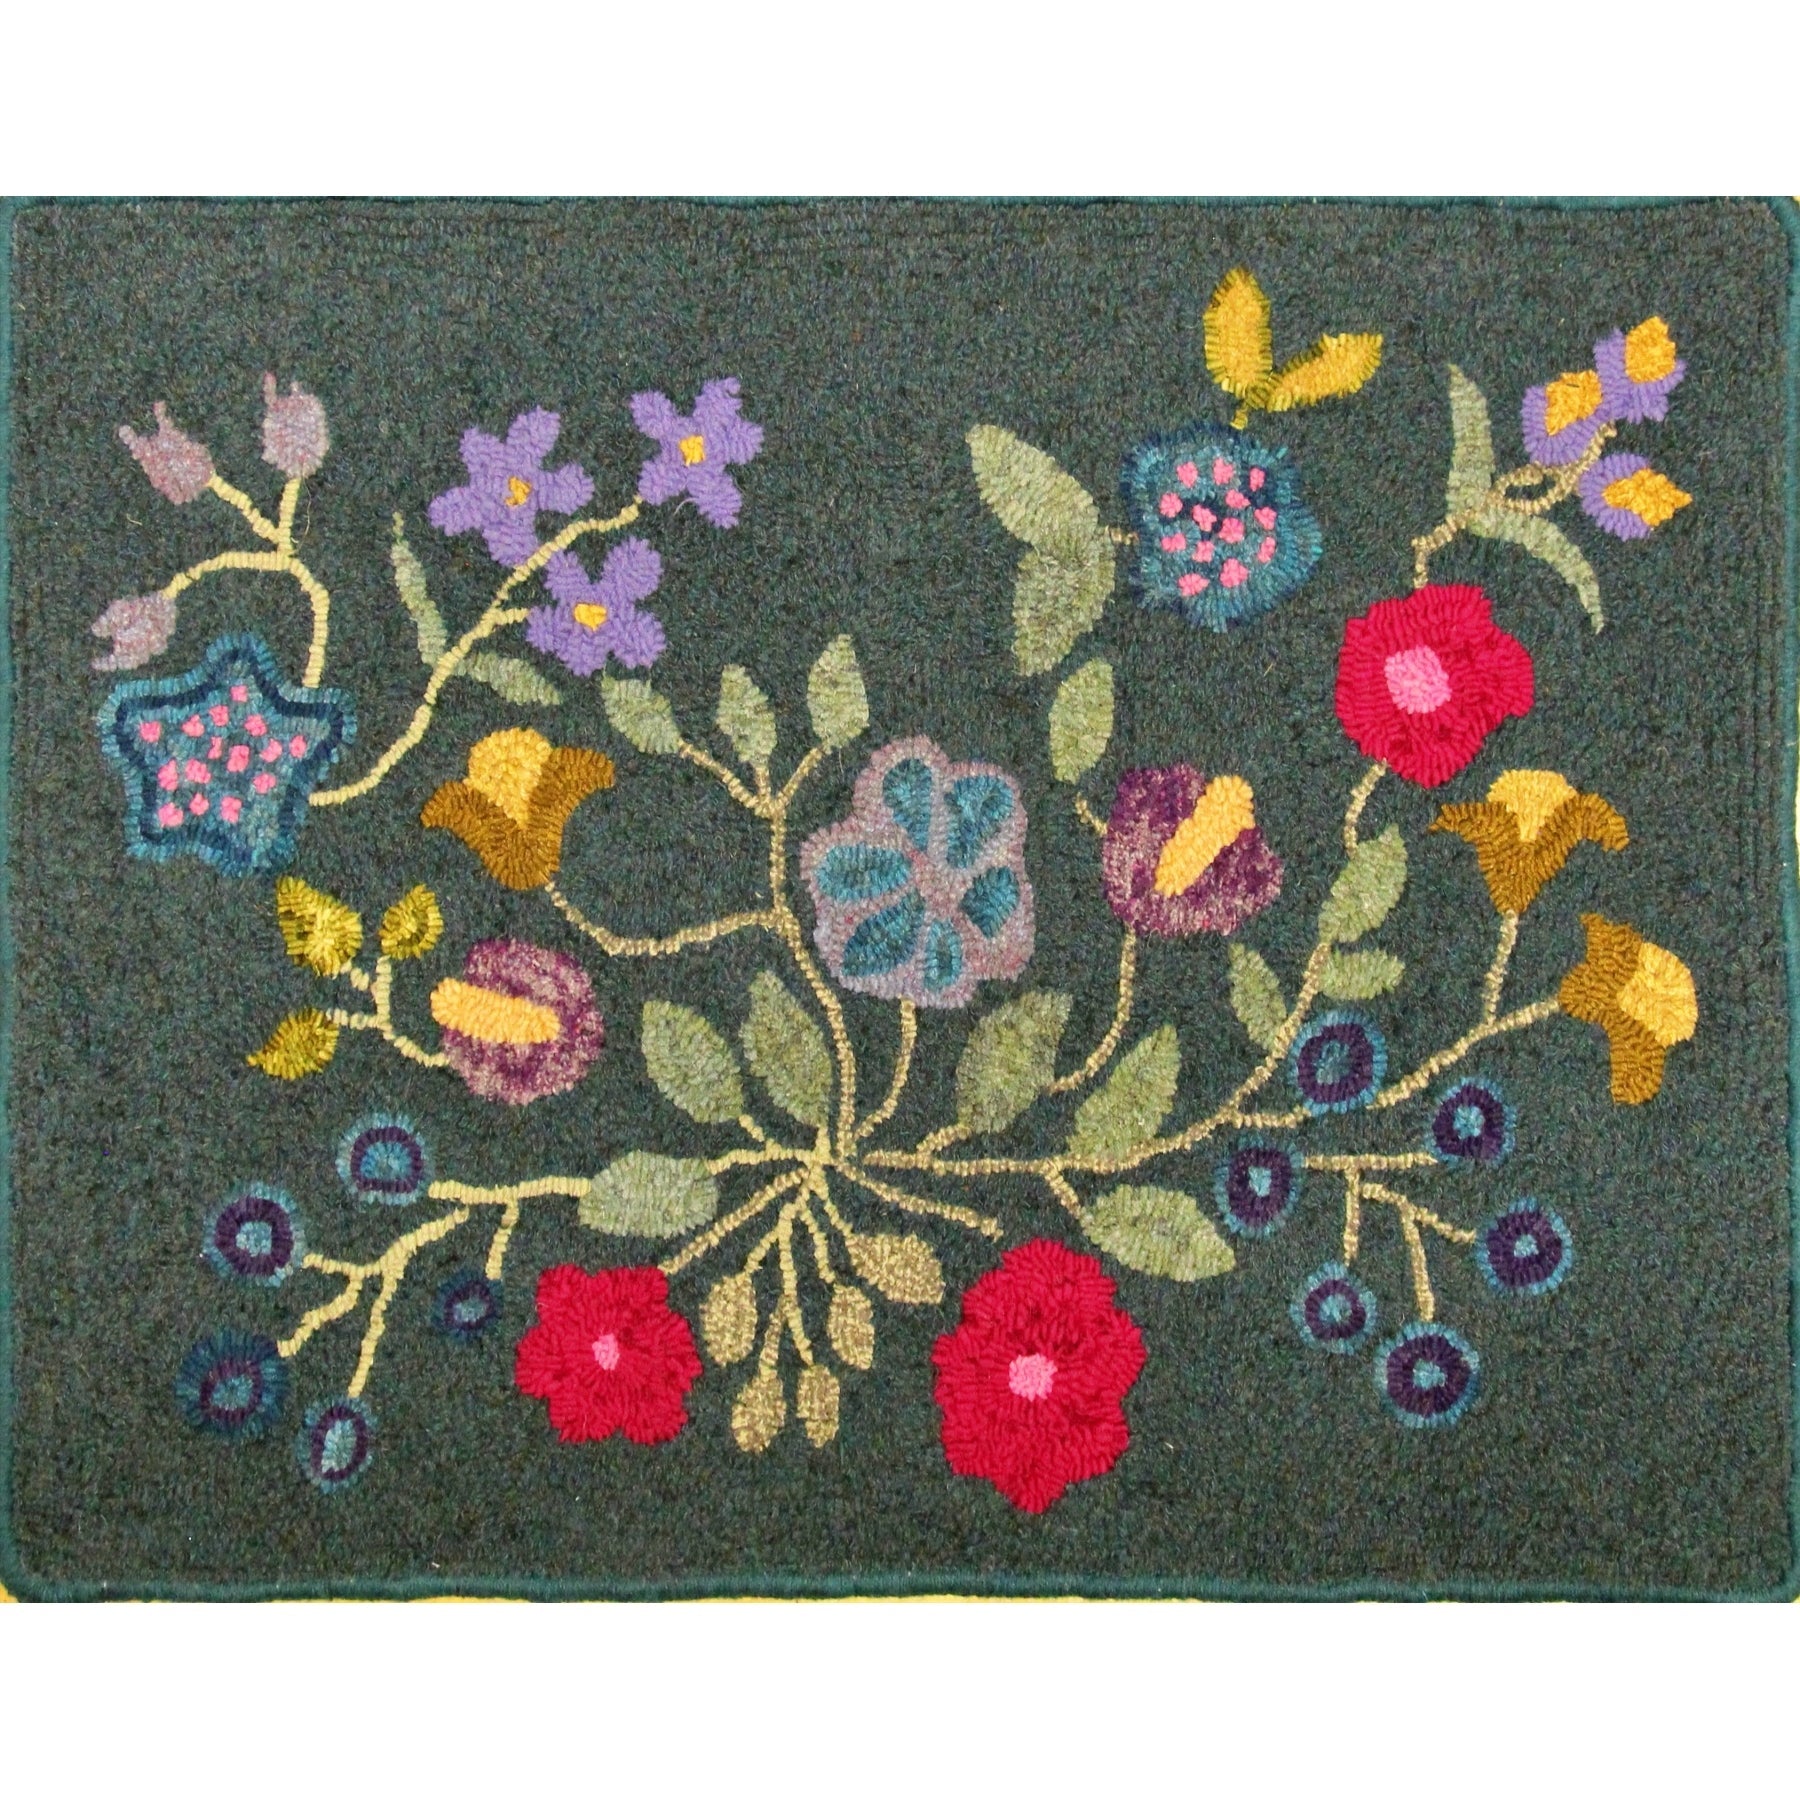 Flower Garden, rug hooked by Unknown